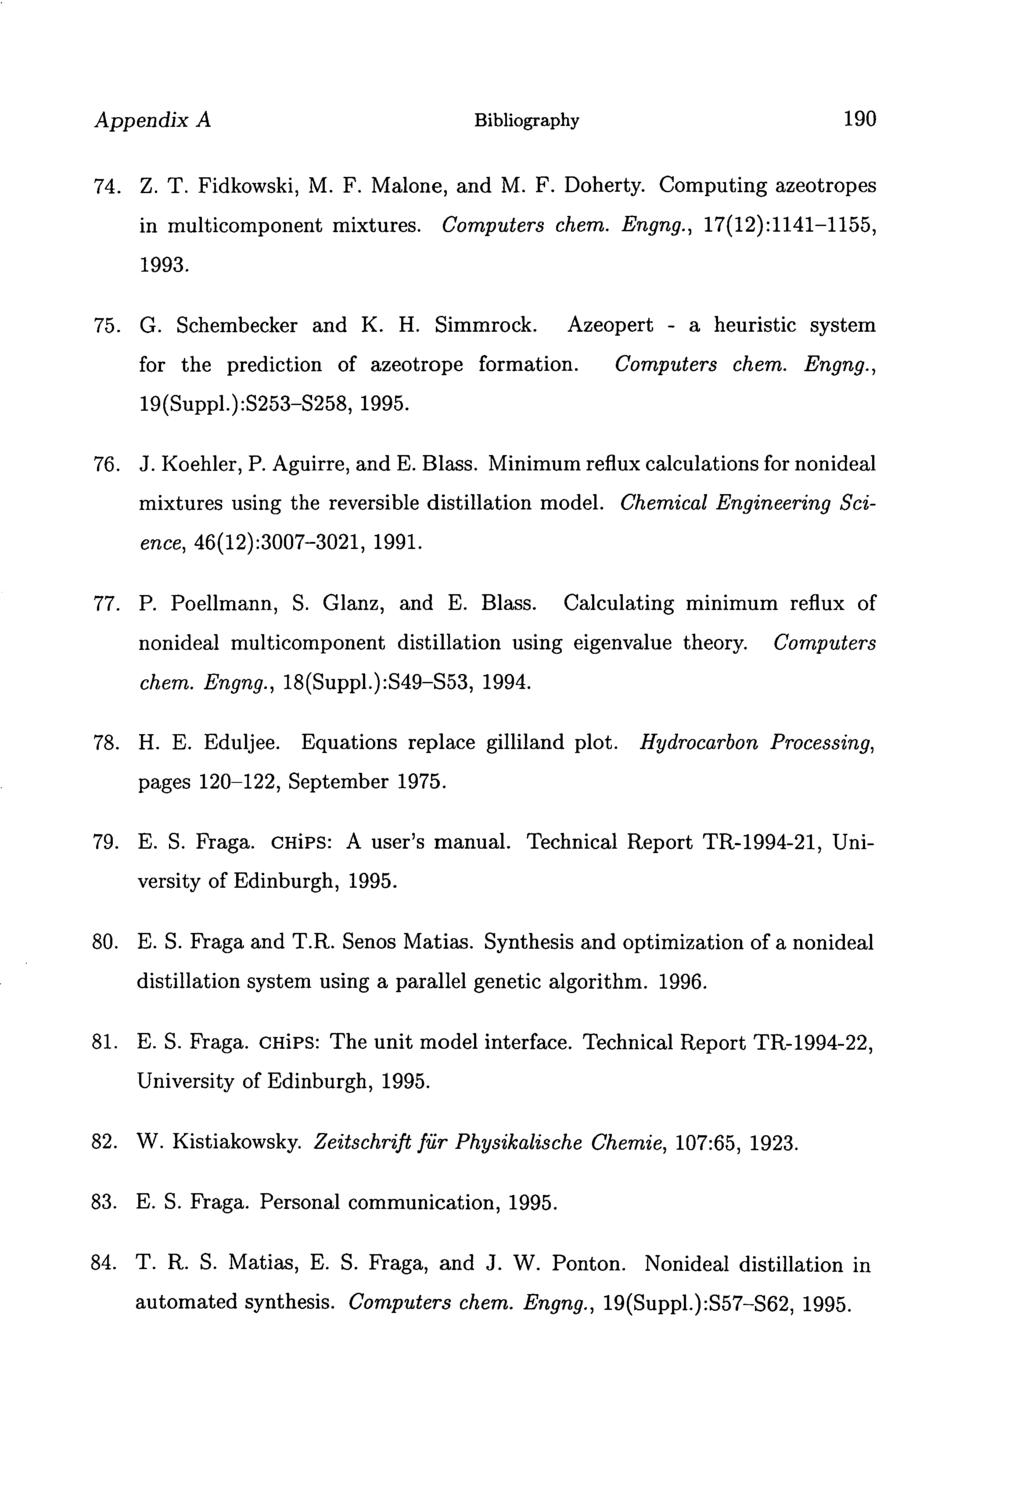 Appendix A Bibliography 190 Z. T. Fidkowski, M. F. Malone, and M. F. Doherty. Computing azeotropes in multicomponent mixtures. Computers chem. Engng., 17(12):1141-1155, 1993. G. Schembecker and K. H.